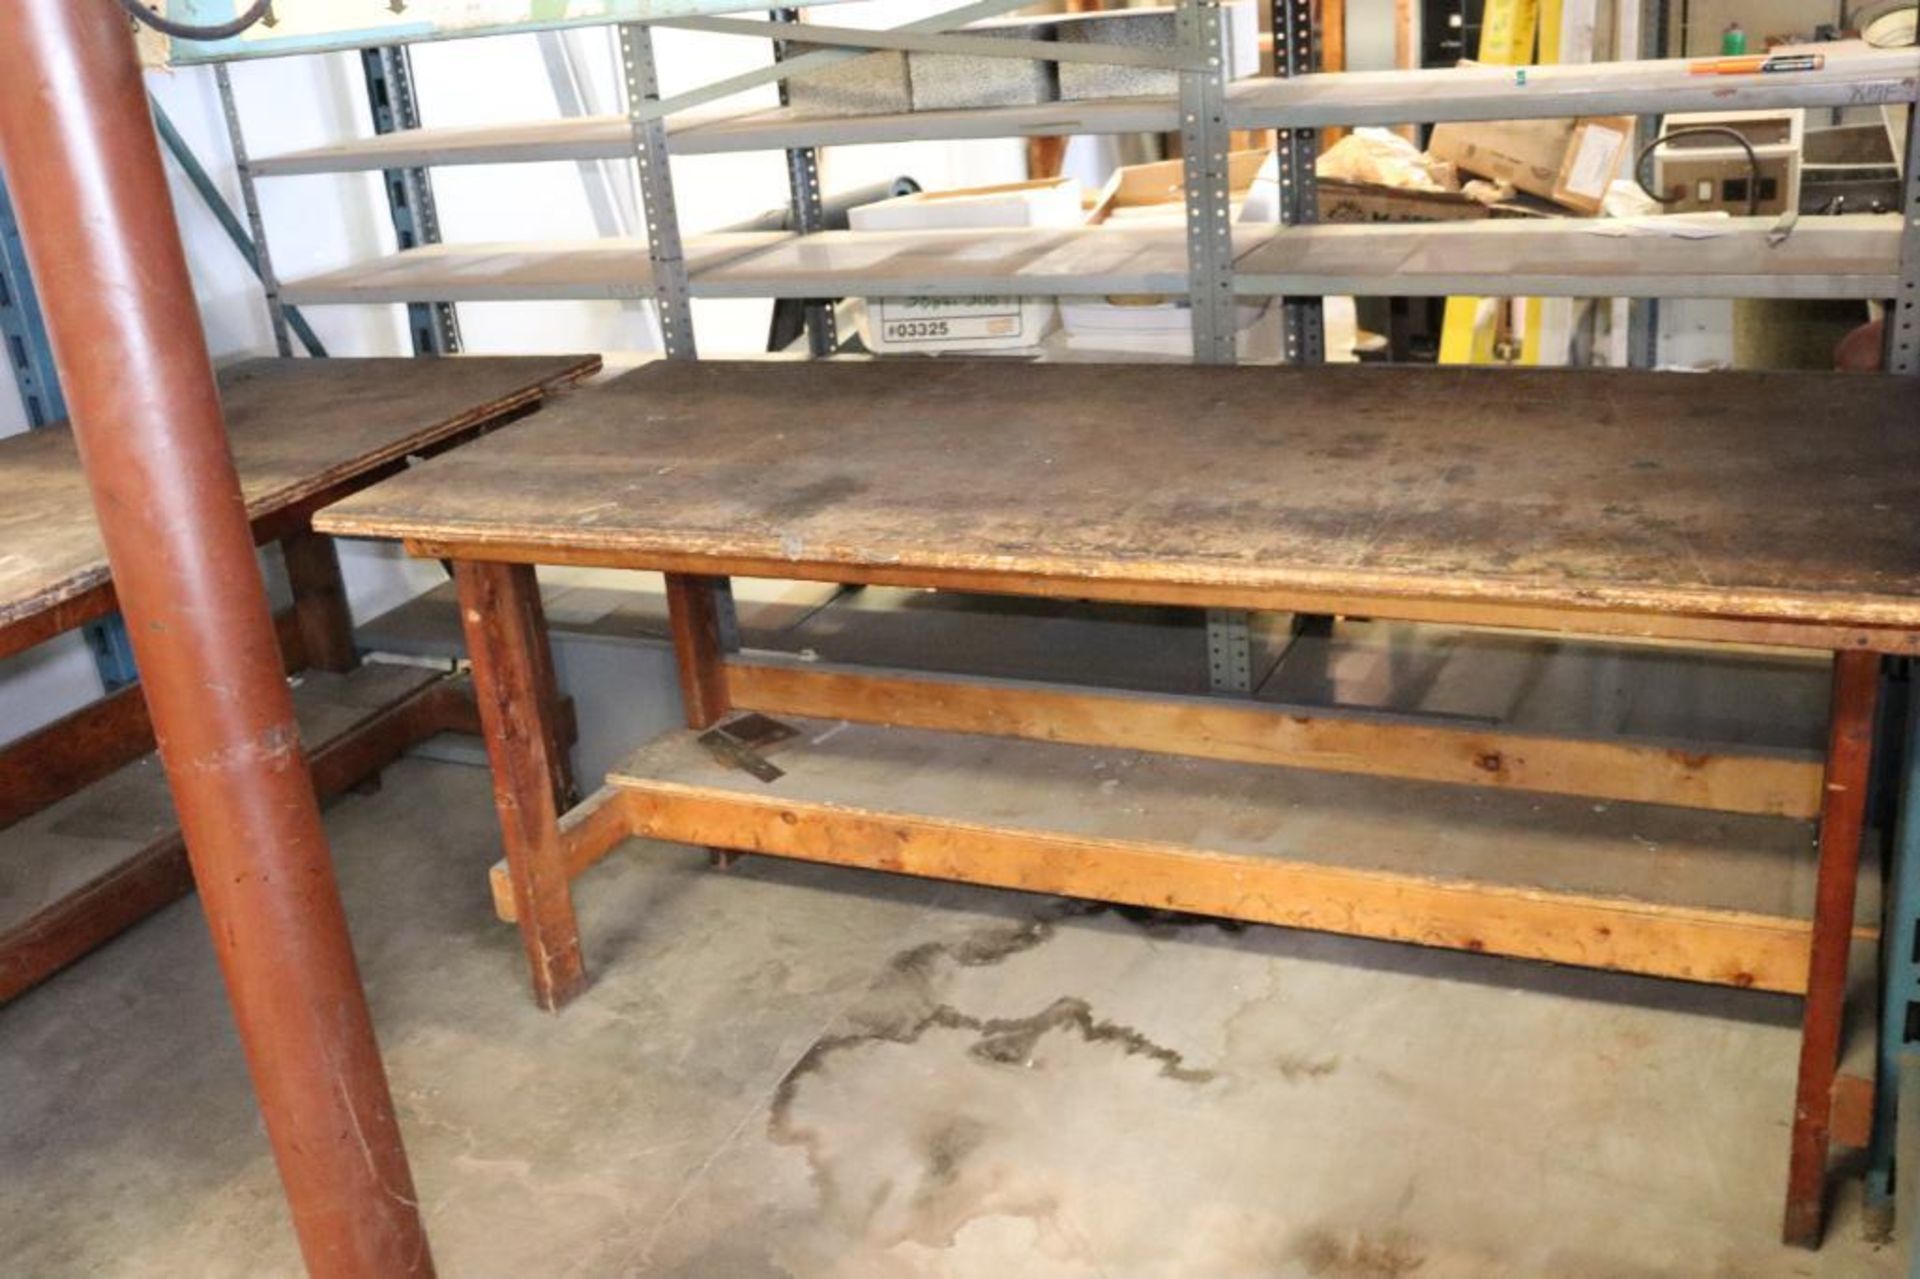 Wooden work benches - Image 2 of 4